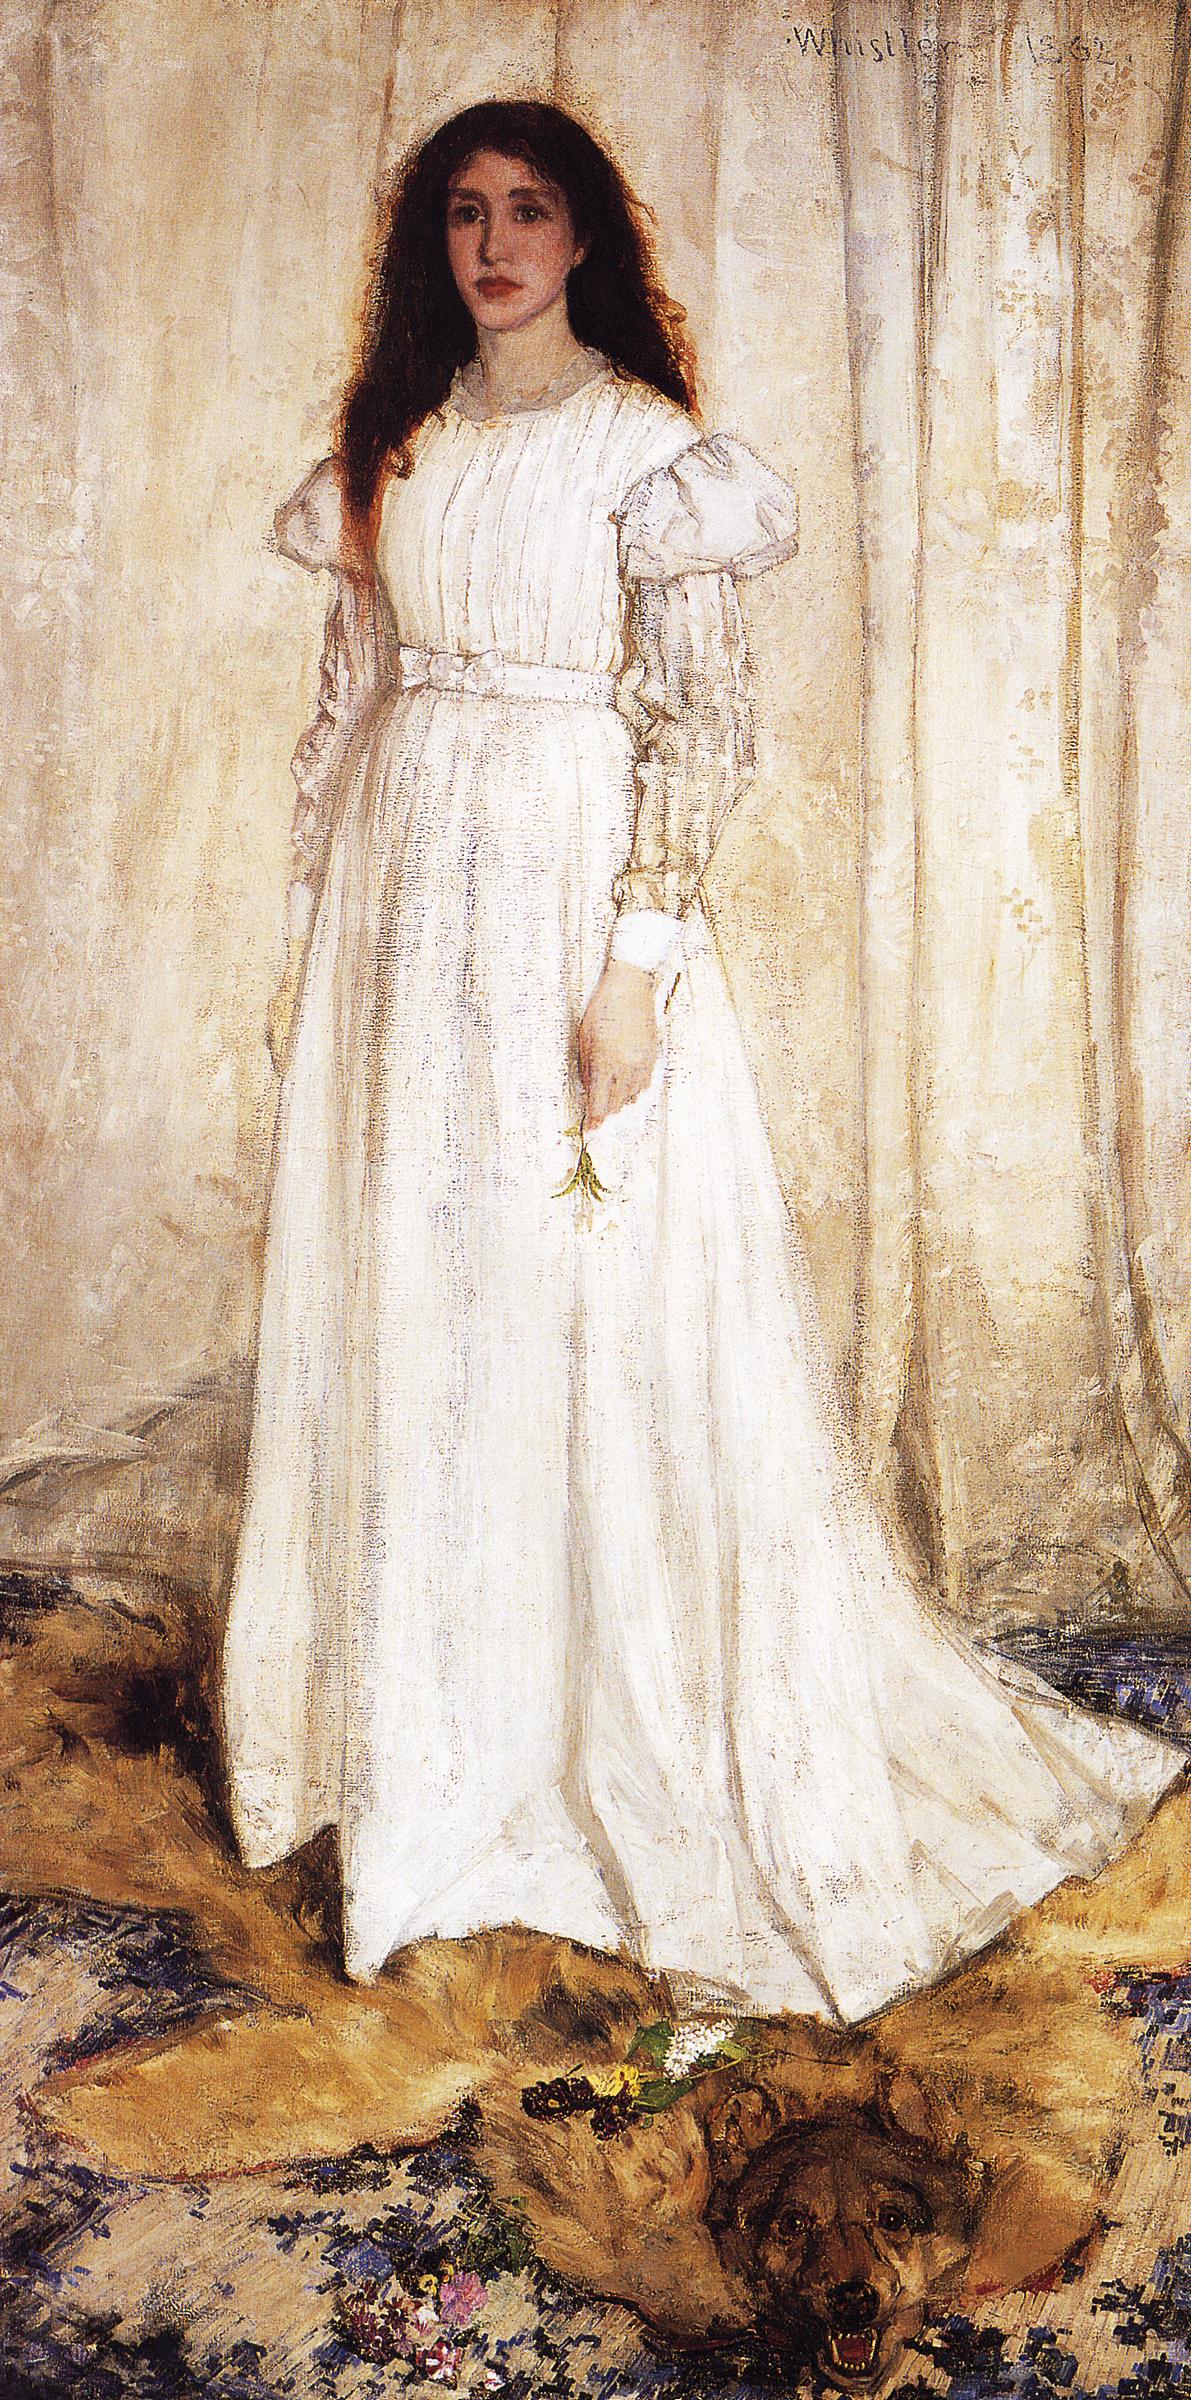 Woman with loose, dark, curly hair in a long white dress